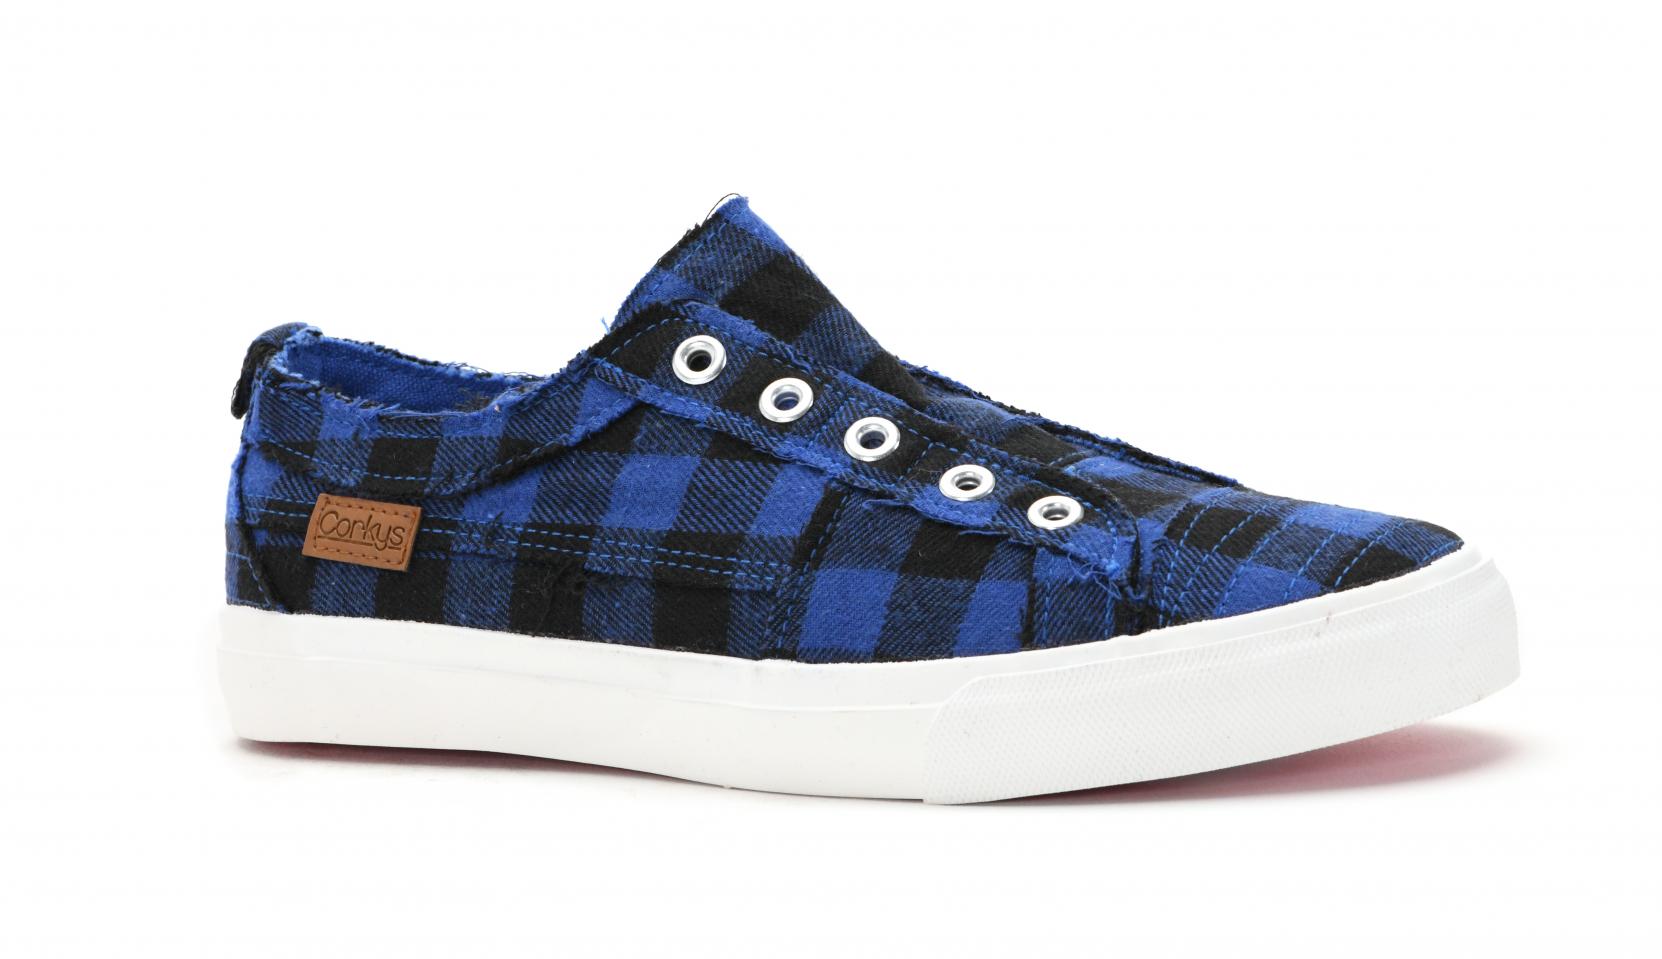 Corkys Shoes - Babalu Blue Plaid Sneaker  SALE 40% OFF   NOW $22.95